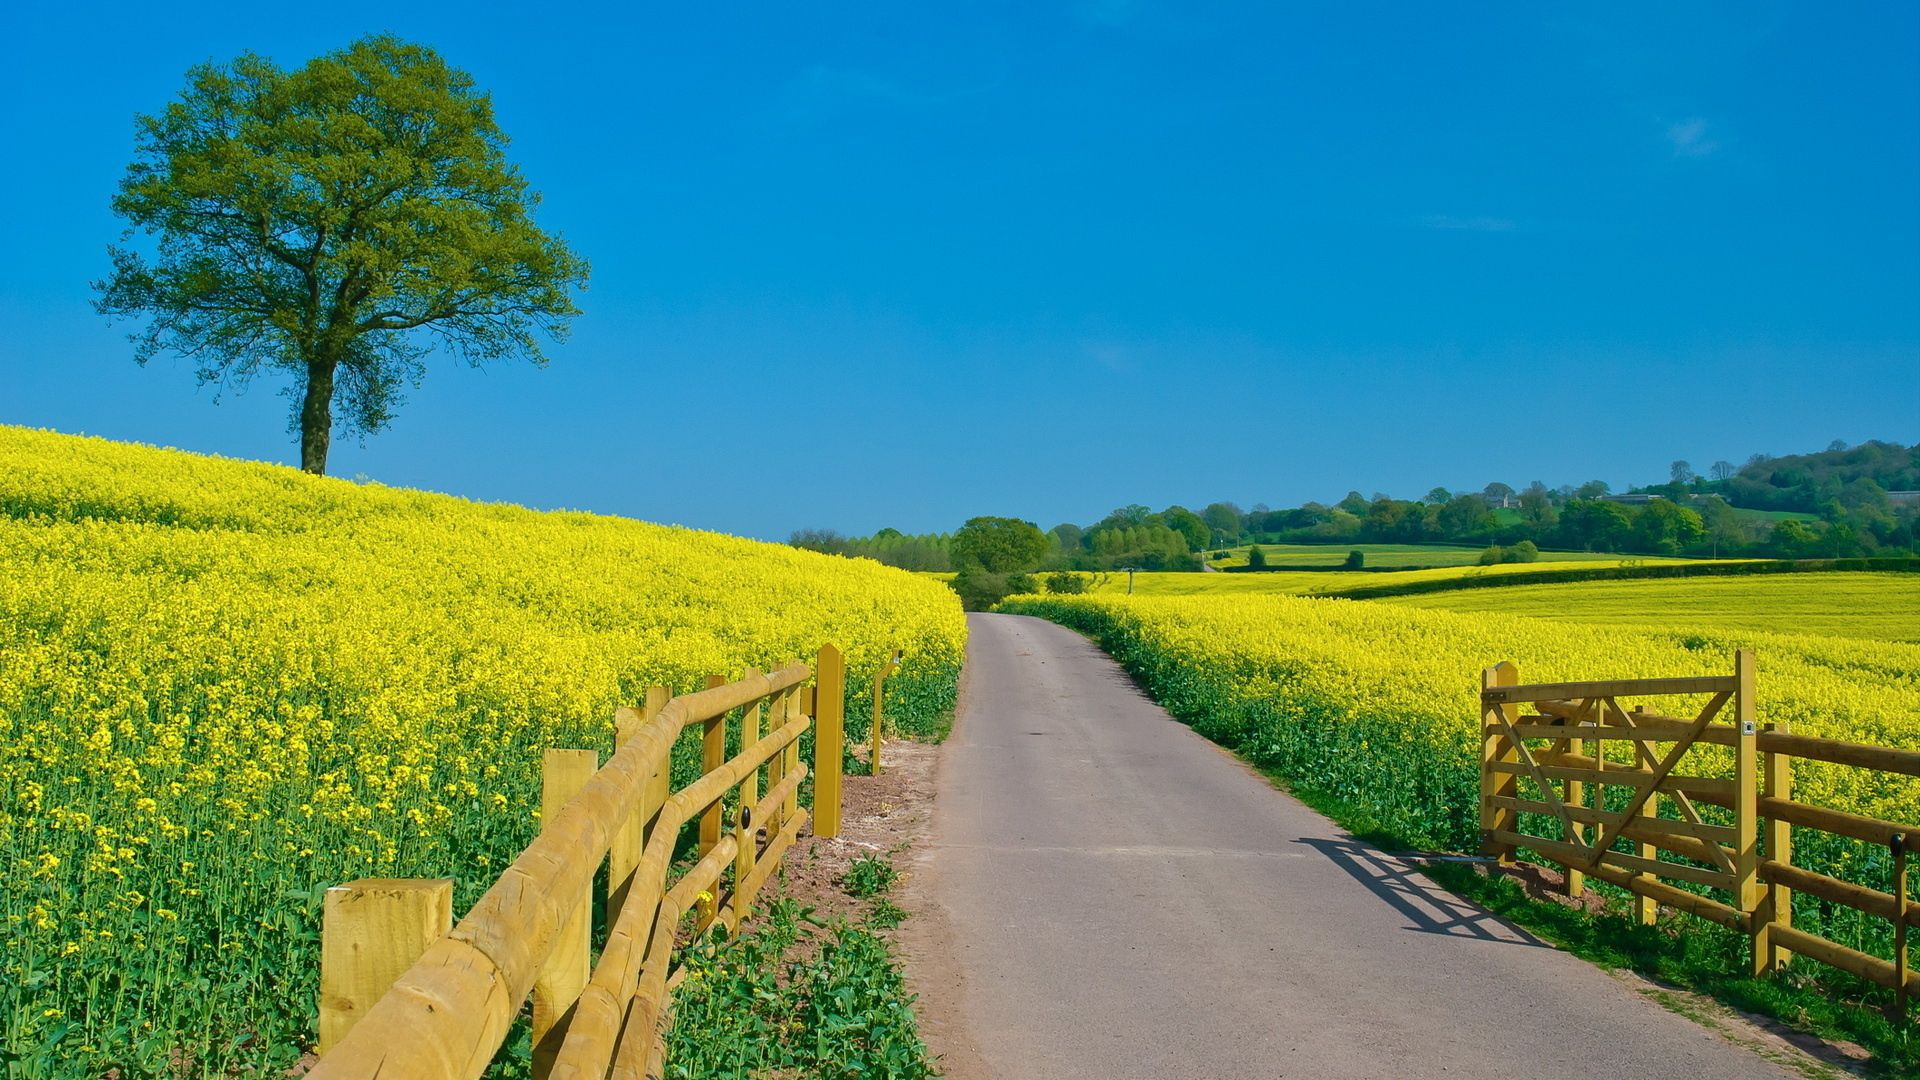 road, summer, open spaces, flowers, slopes, yellow, nature, fencing, enclosure, day, expanse